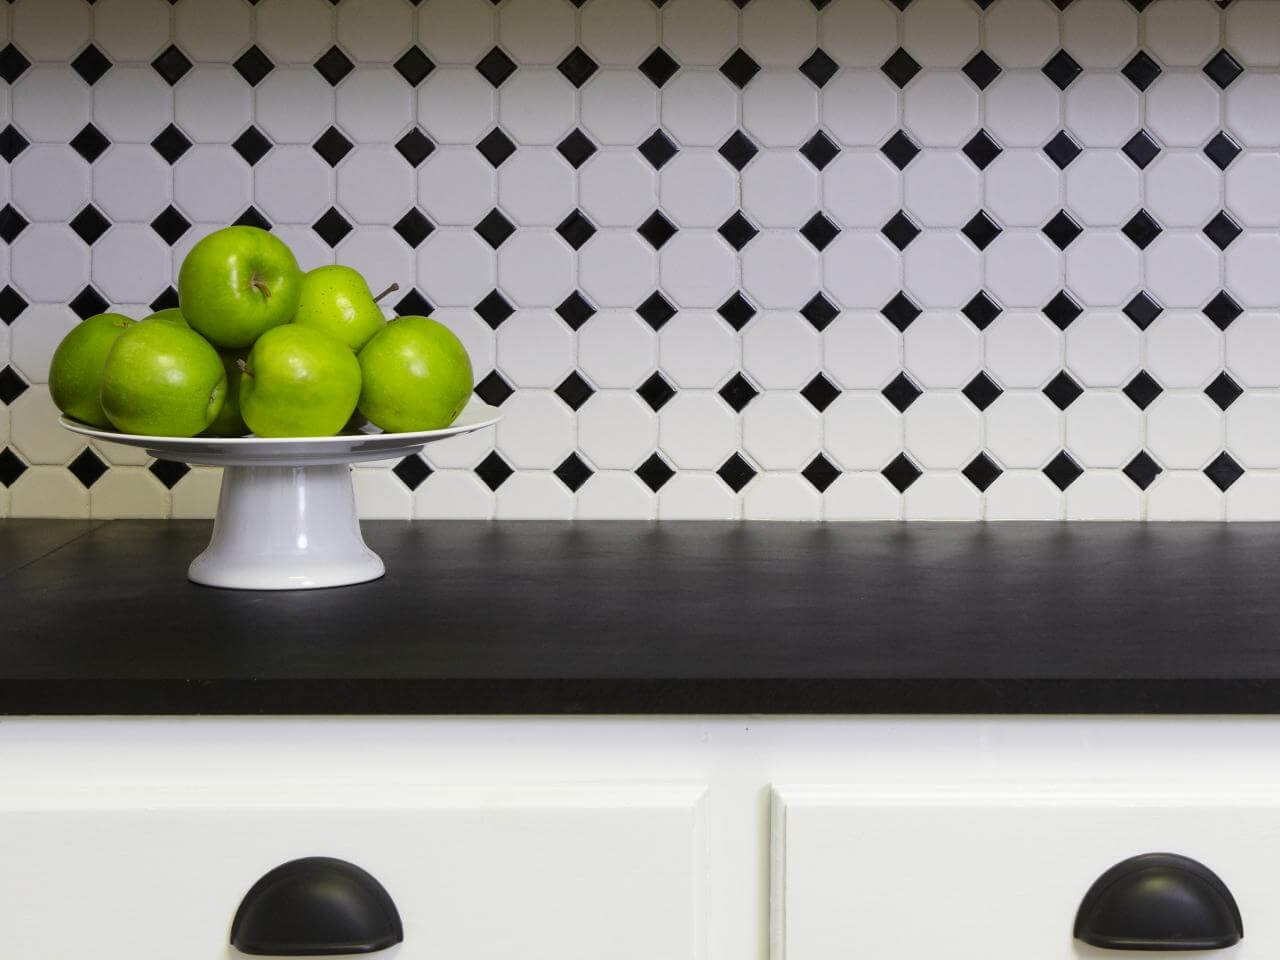 Beautiful kitchen rear wall with black and white tiles